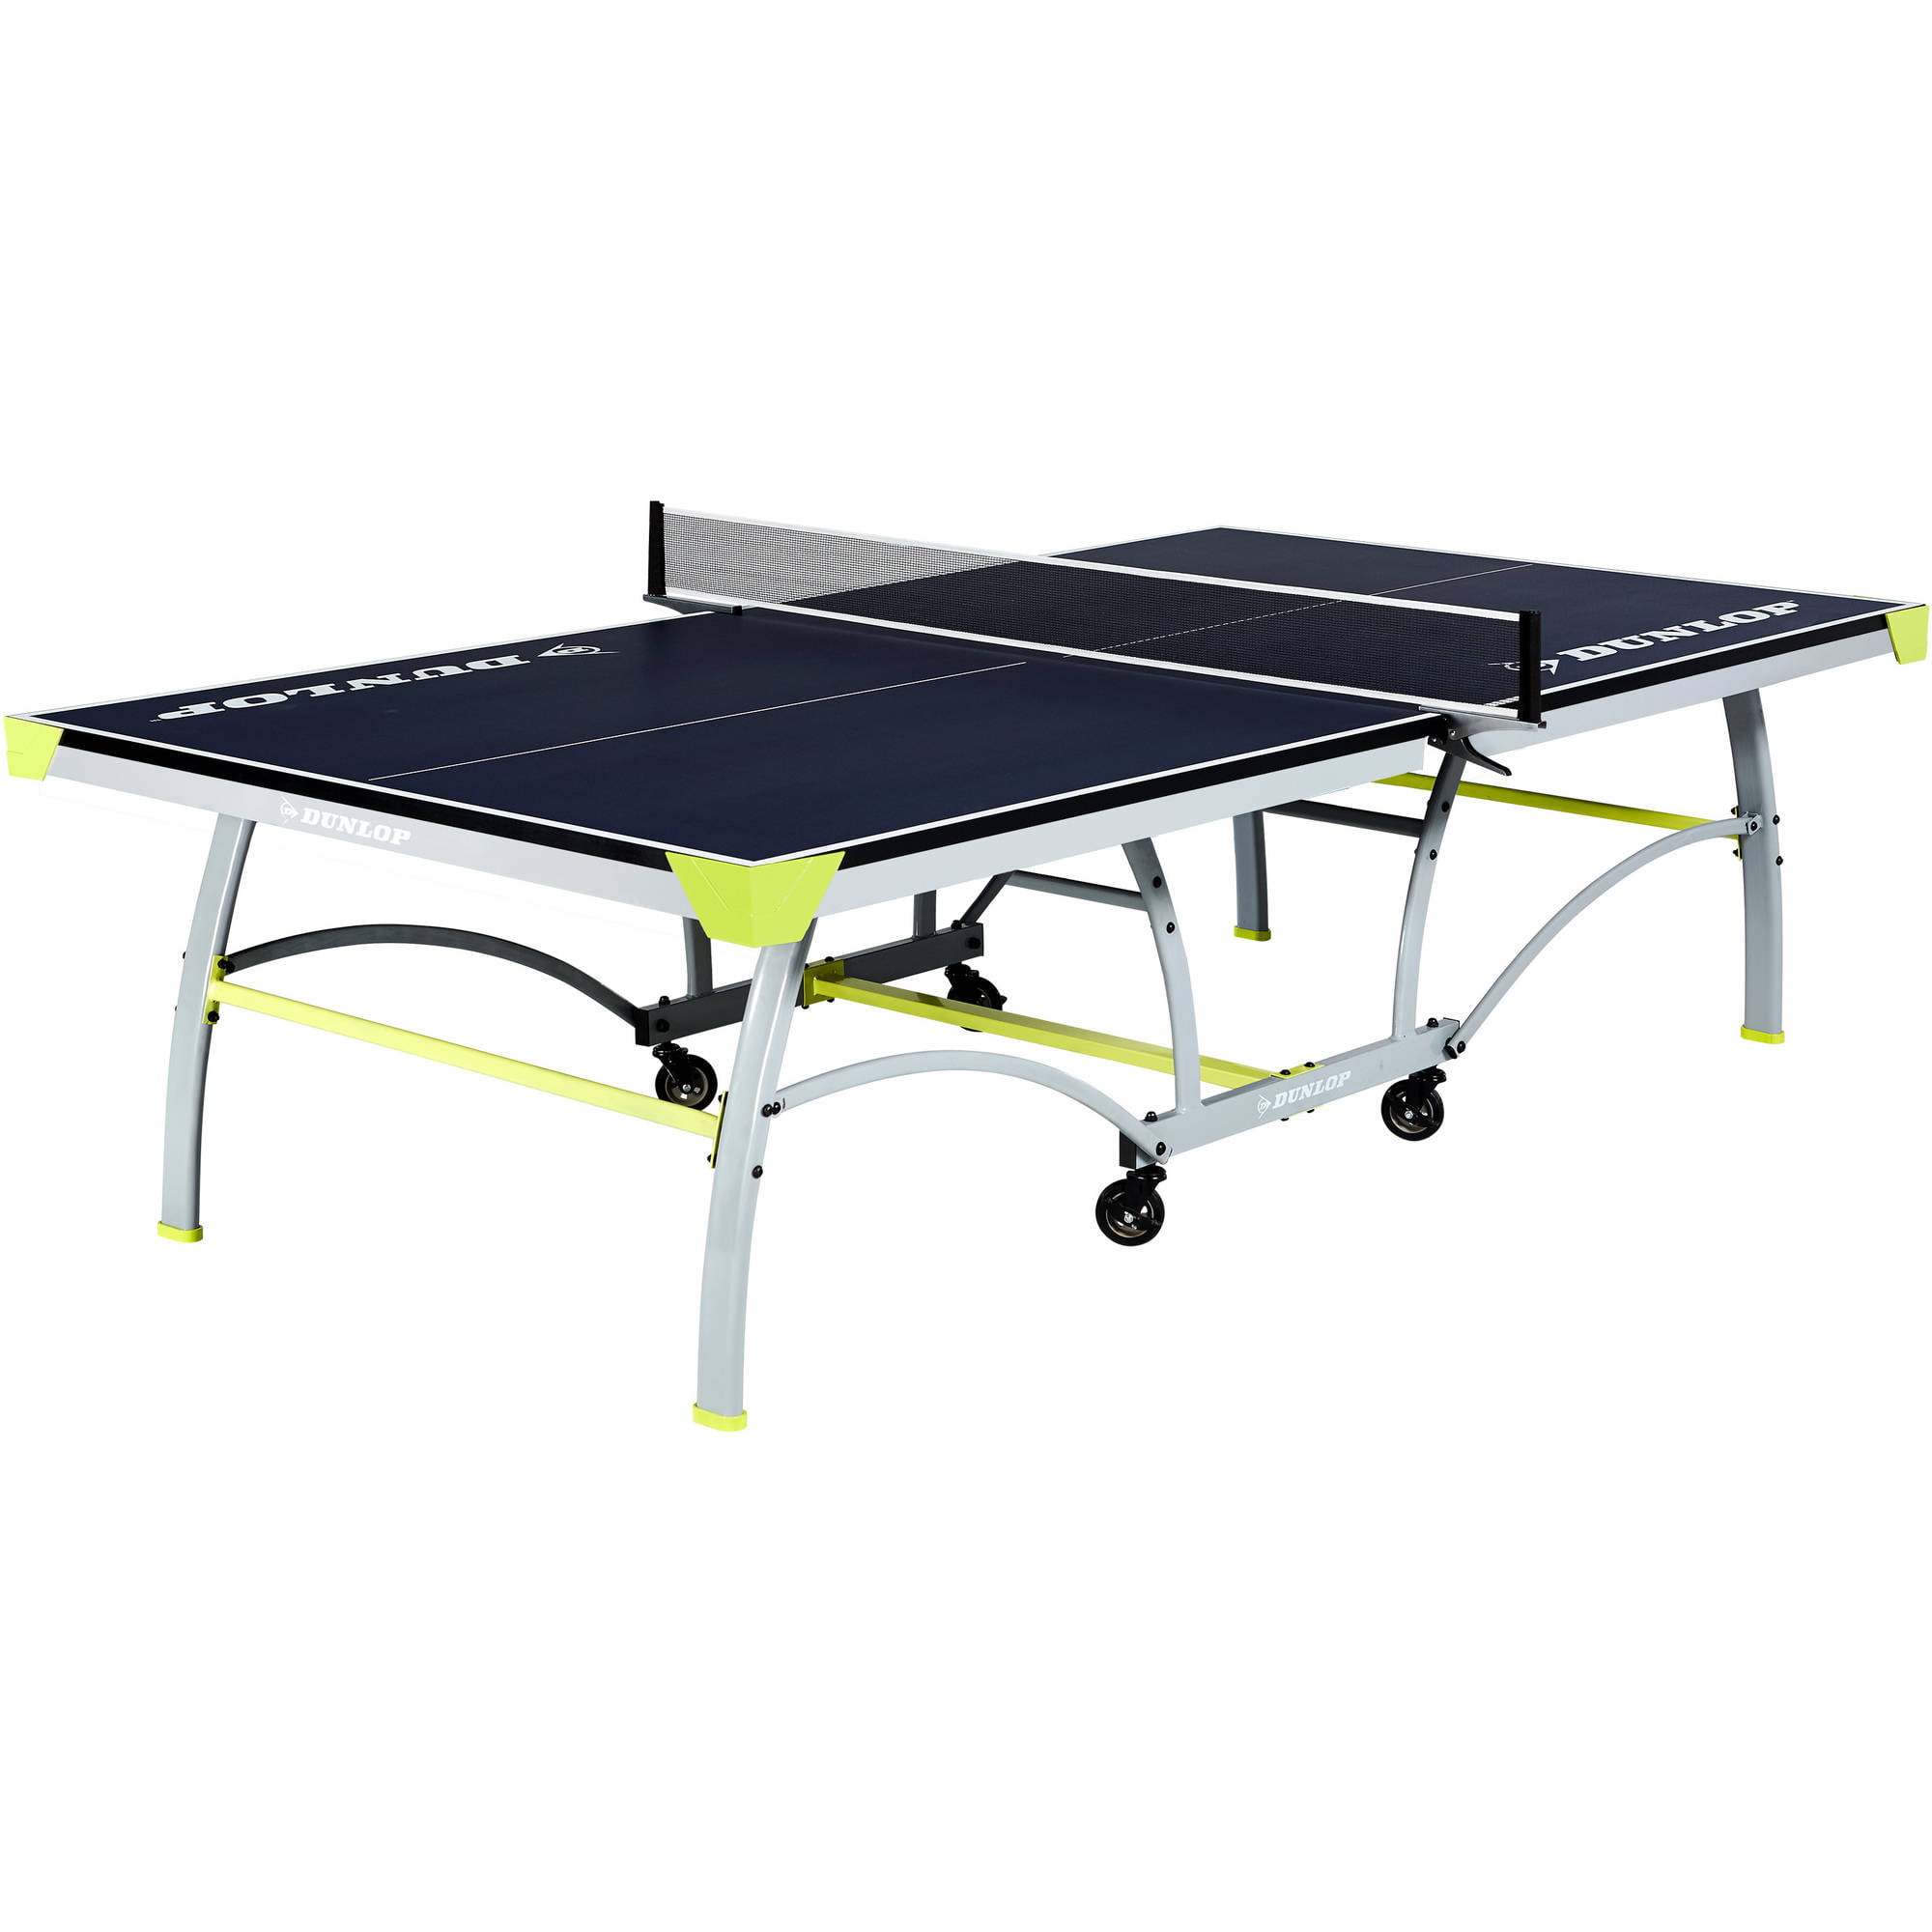 Single Player or 2-Player Dunlop 2-Piece Table Tennis Table 